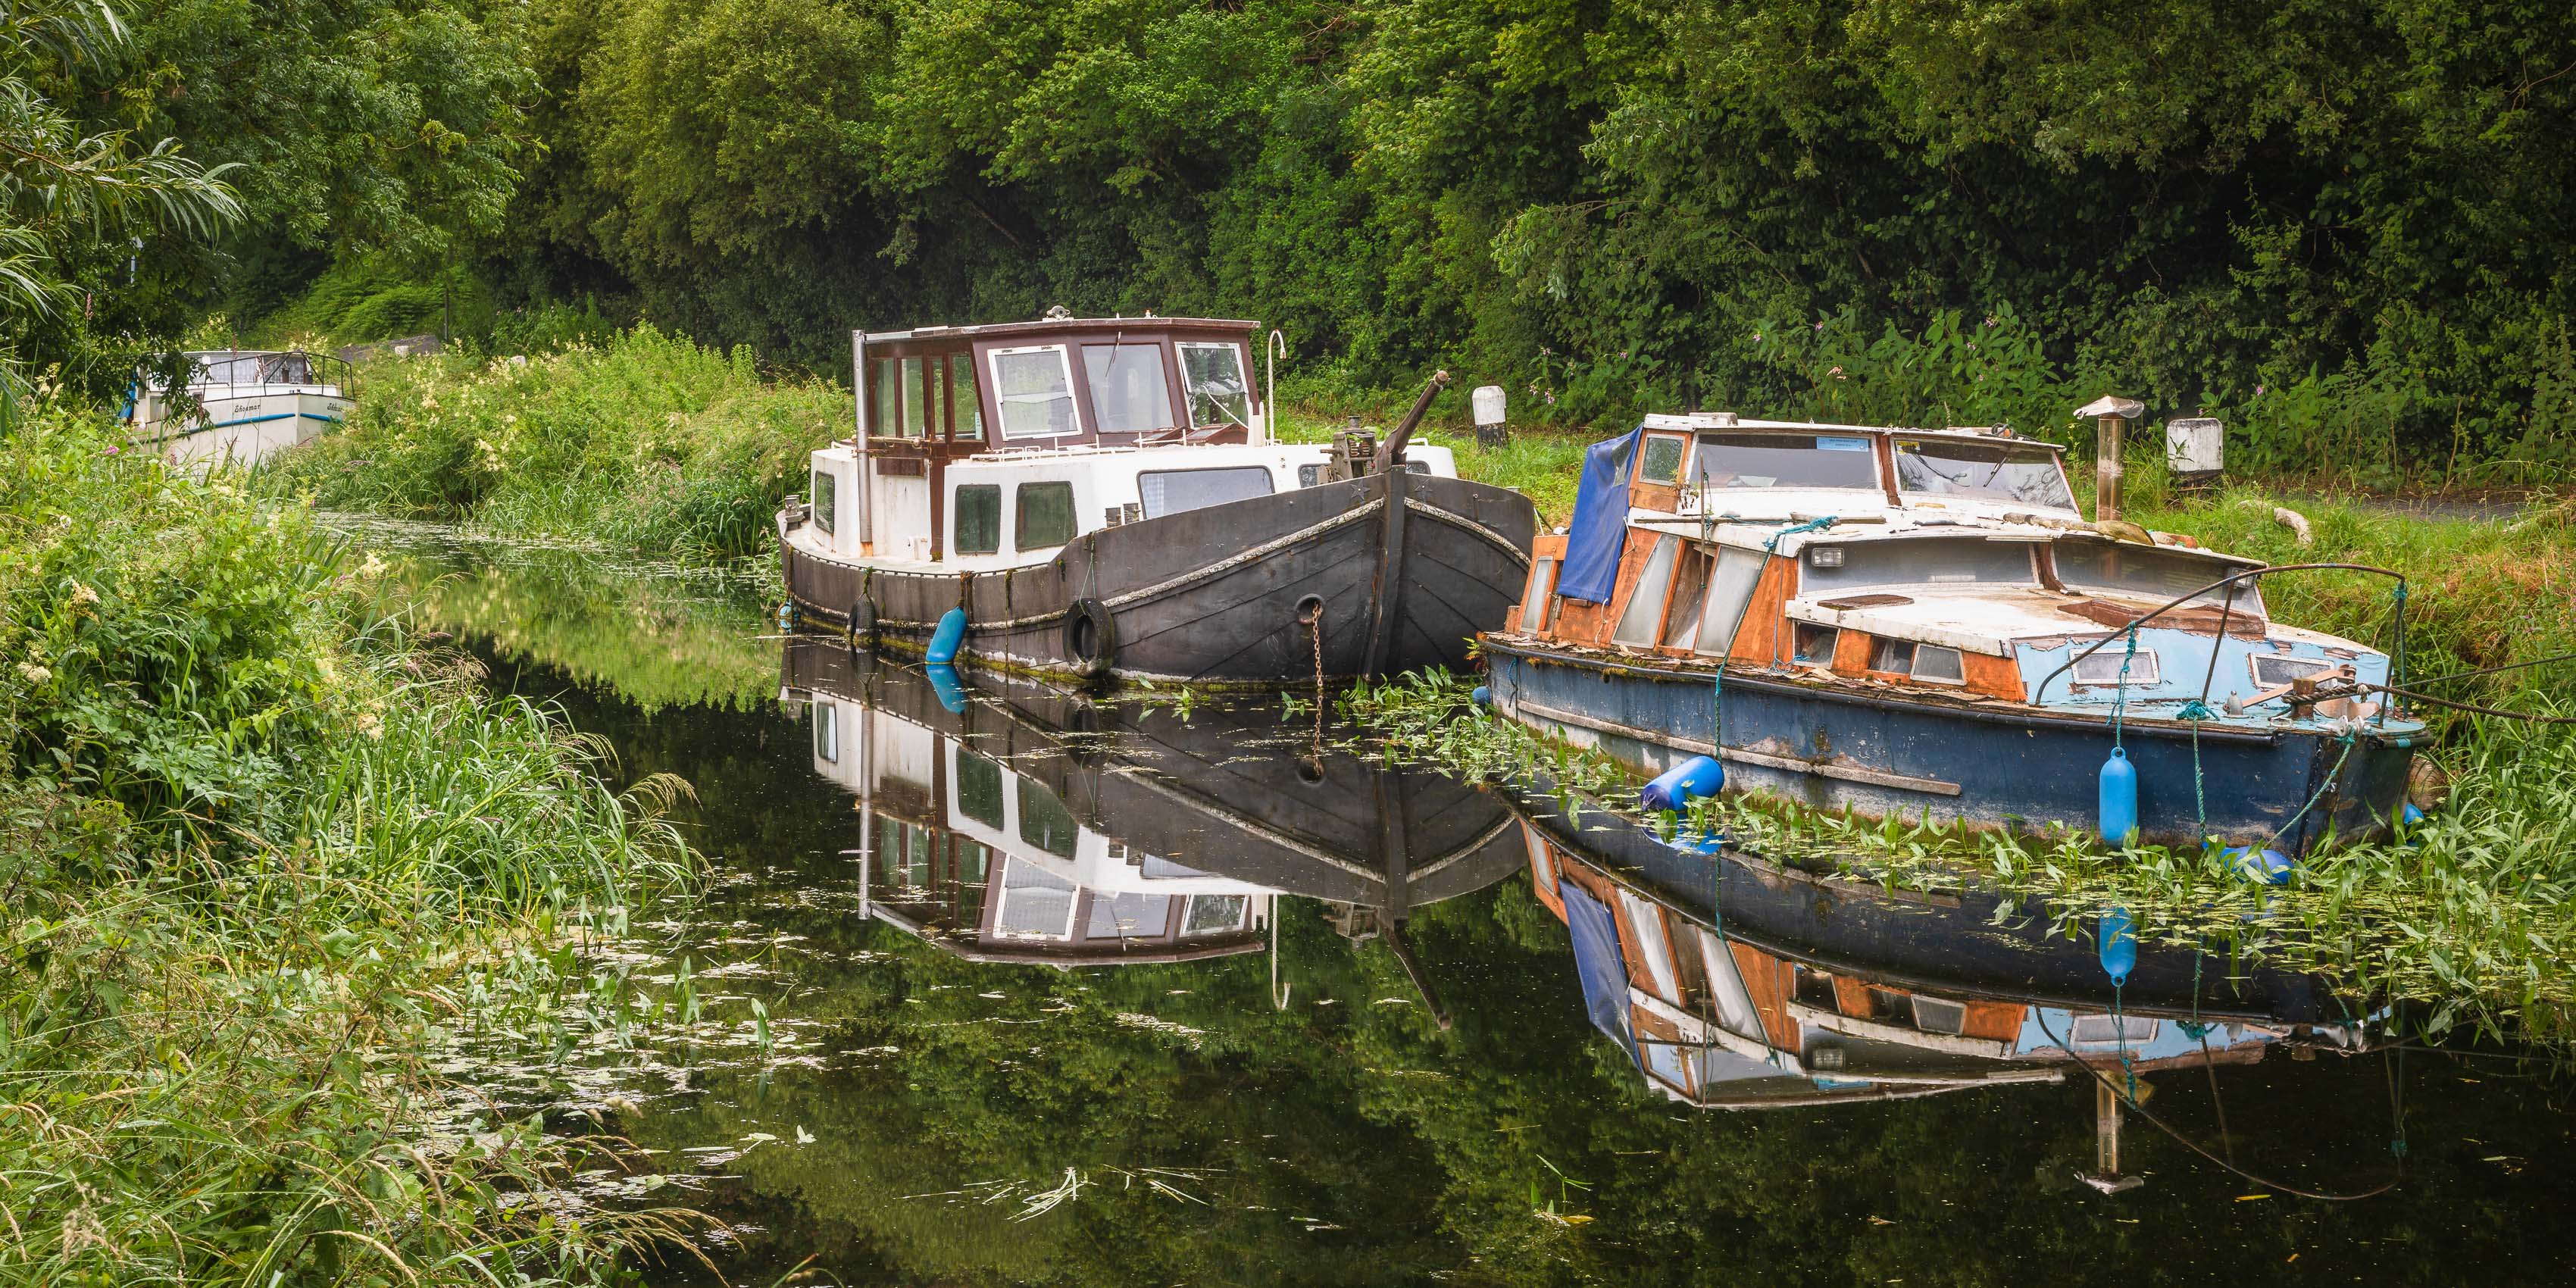 Boats on a lateral canal of the Barrow Navigation at St Mullin's (Tigh Moling), County Carlow, Ireland. BR003